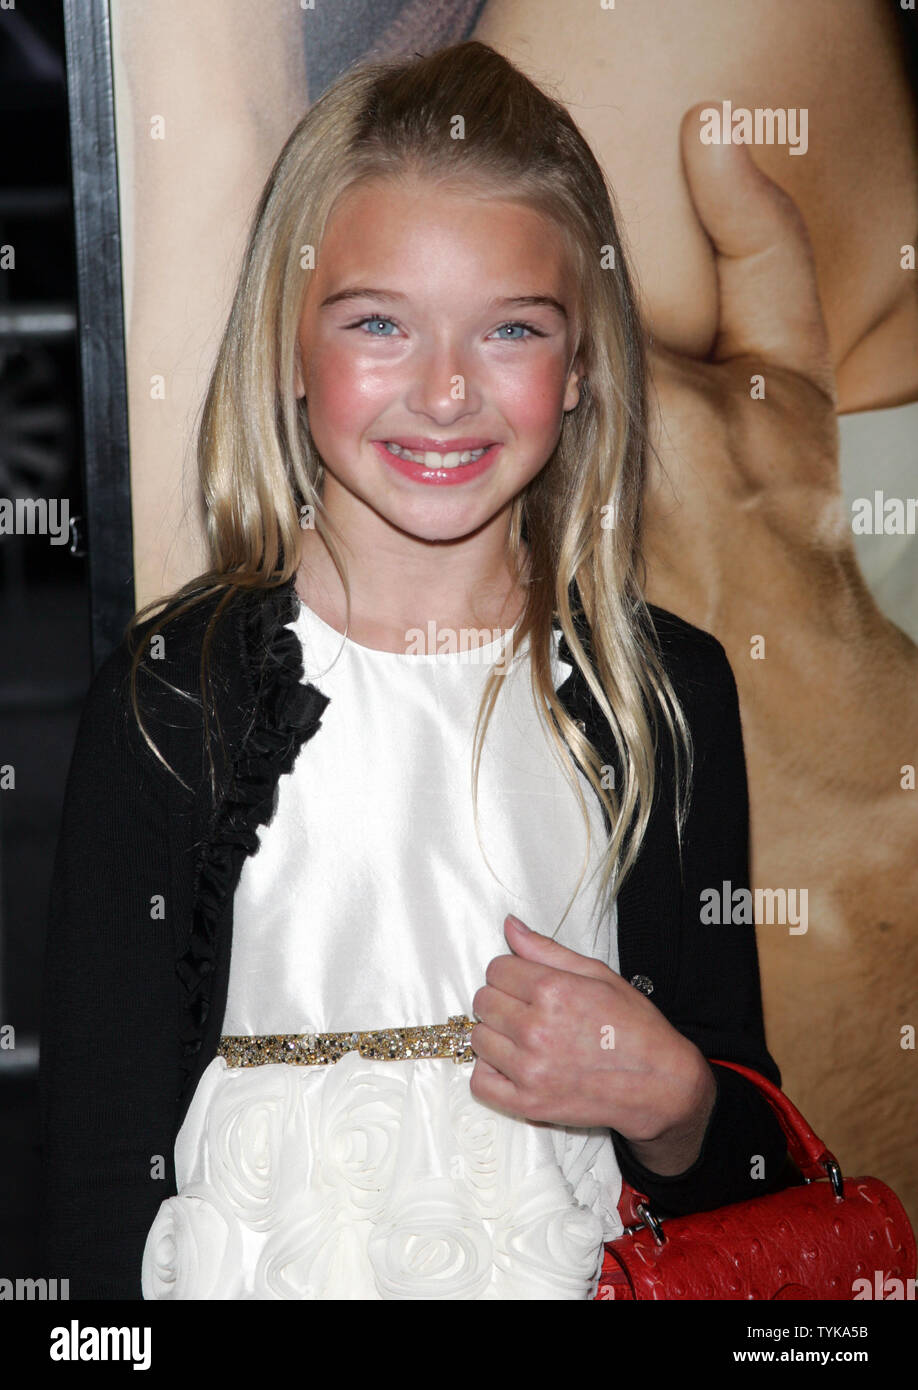 Brooklynn Proulx arrives for the premiere of 'The Time Traveler's Wife' at the Ziegfeld Theatre in New York on August 12, 2009.       UPI Photo/Laura Cavanaugh Stock Photo